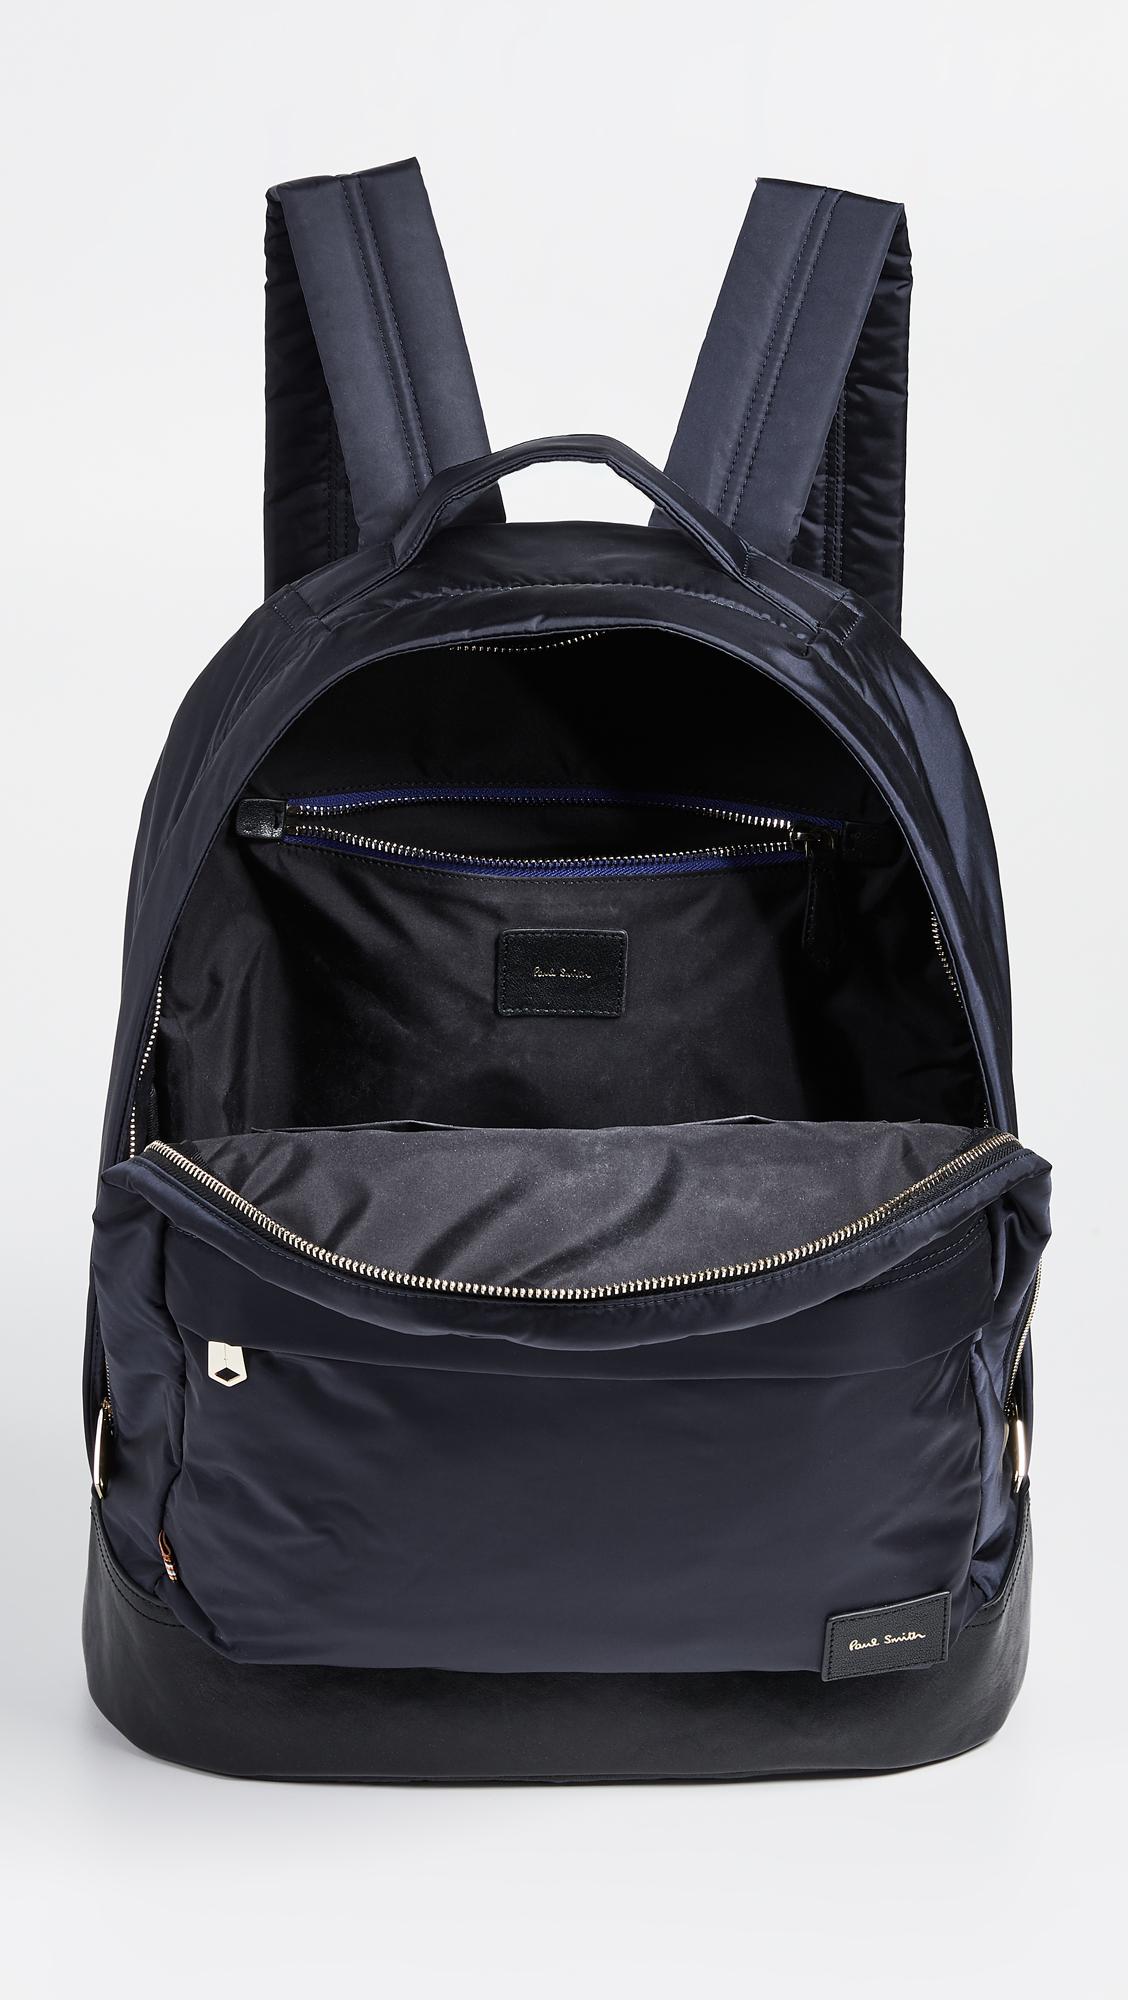 Paul Smith Synthetic Nylon Backpack in Navy (Blue) for Men - Lyst